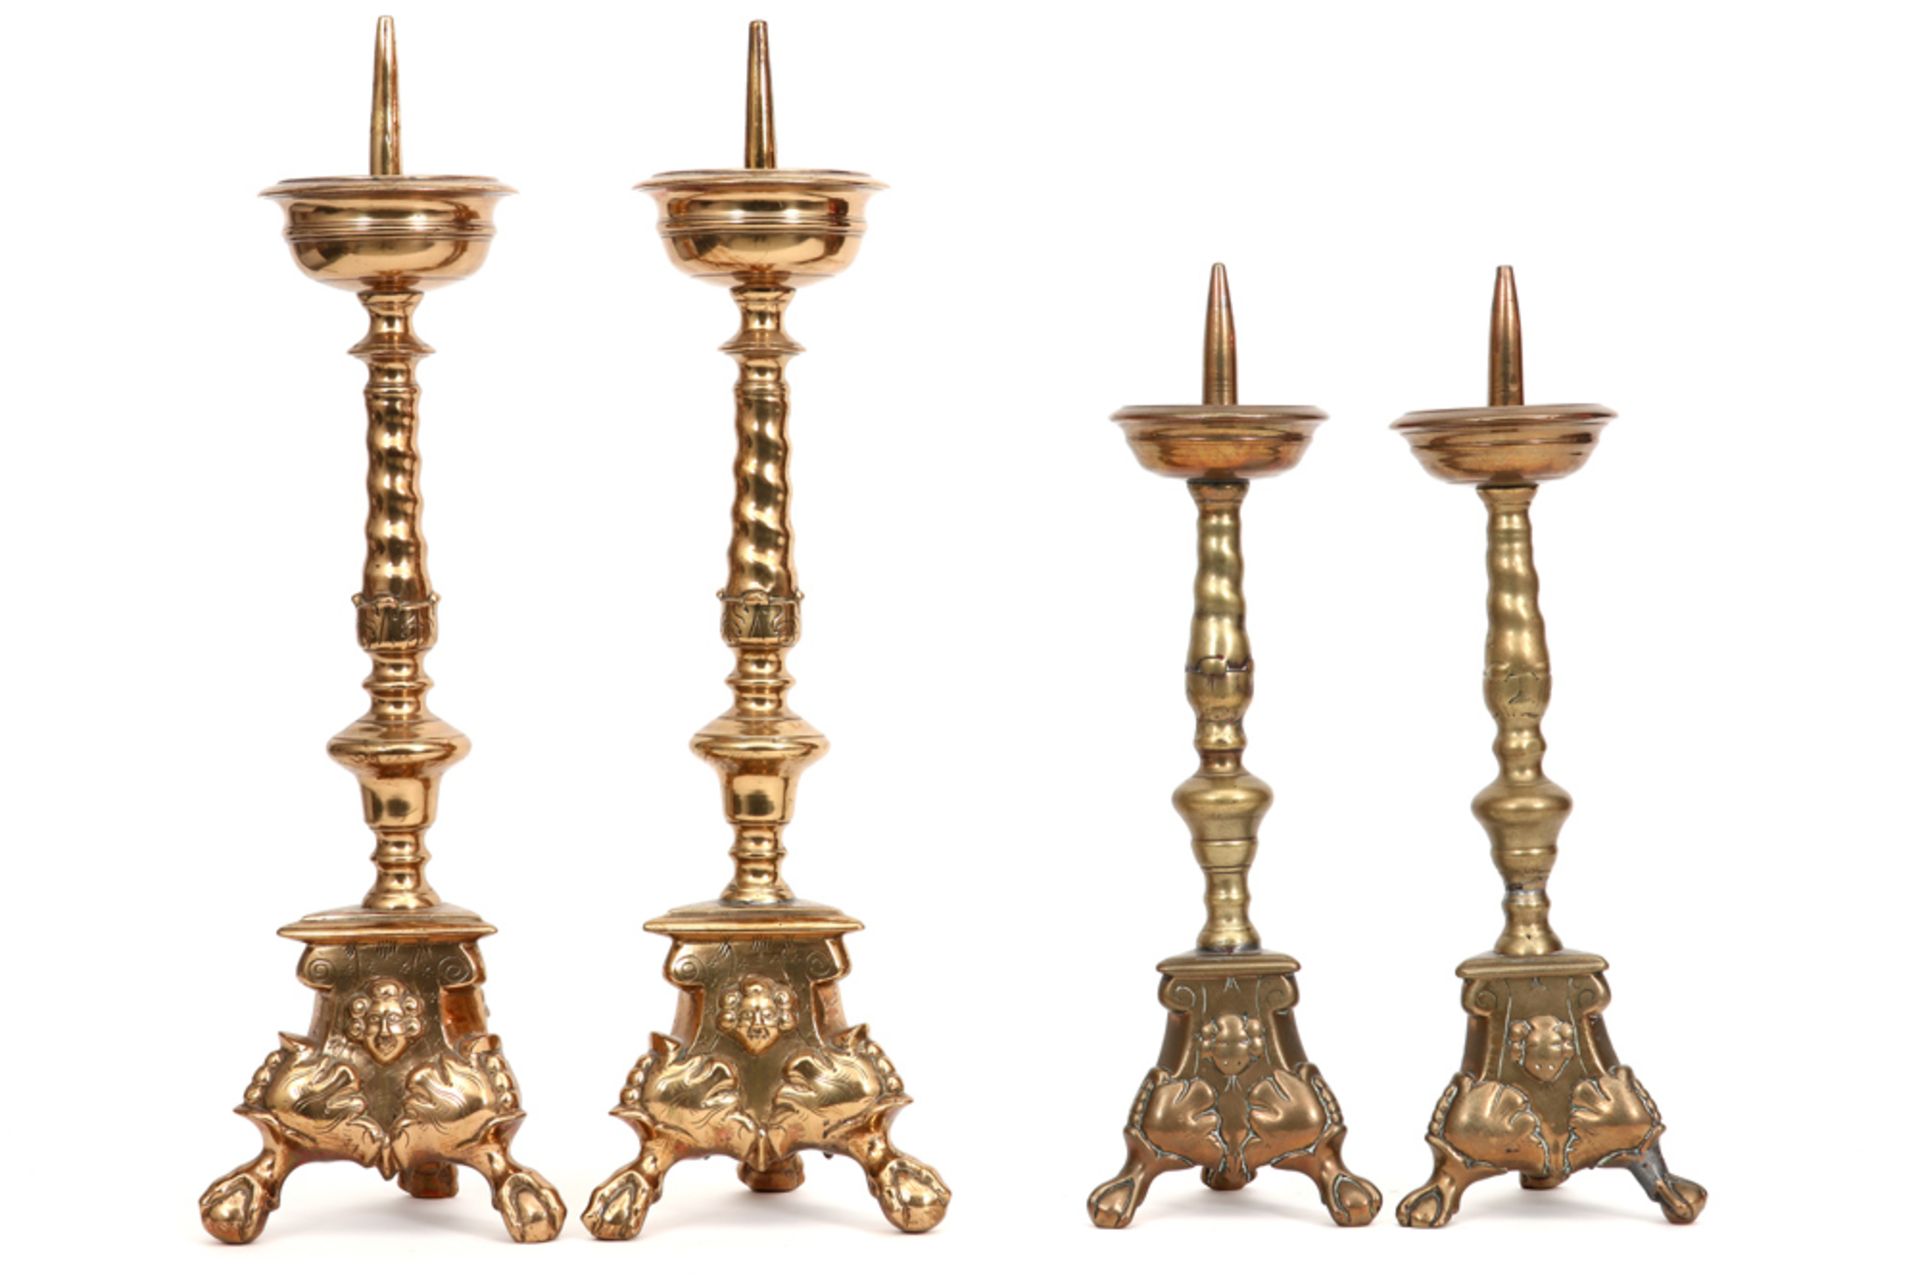 two pairs of brass 17th Cent. Flemish candlesticks with certificate and buyer's note of antique - Image 2 of 3